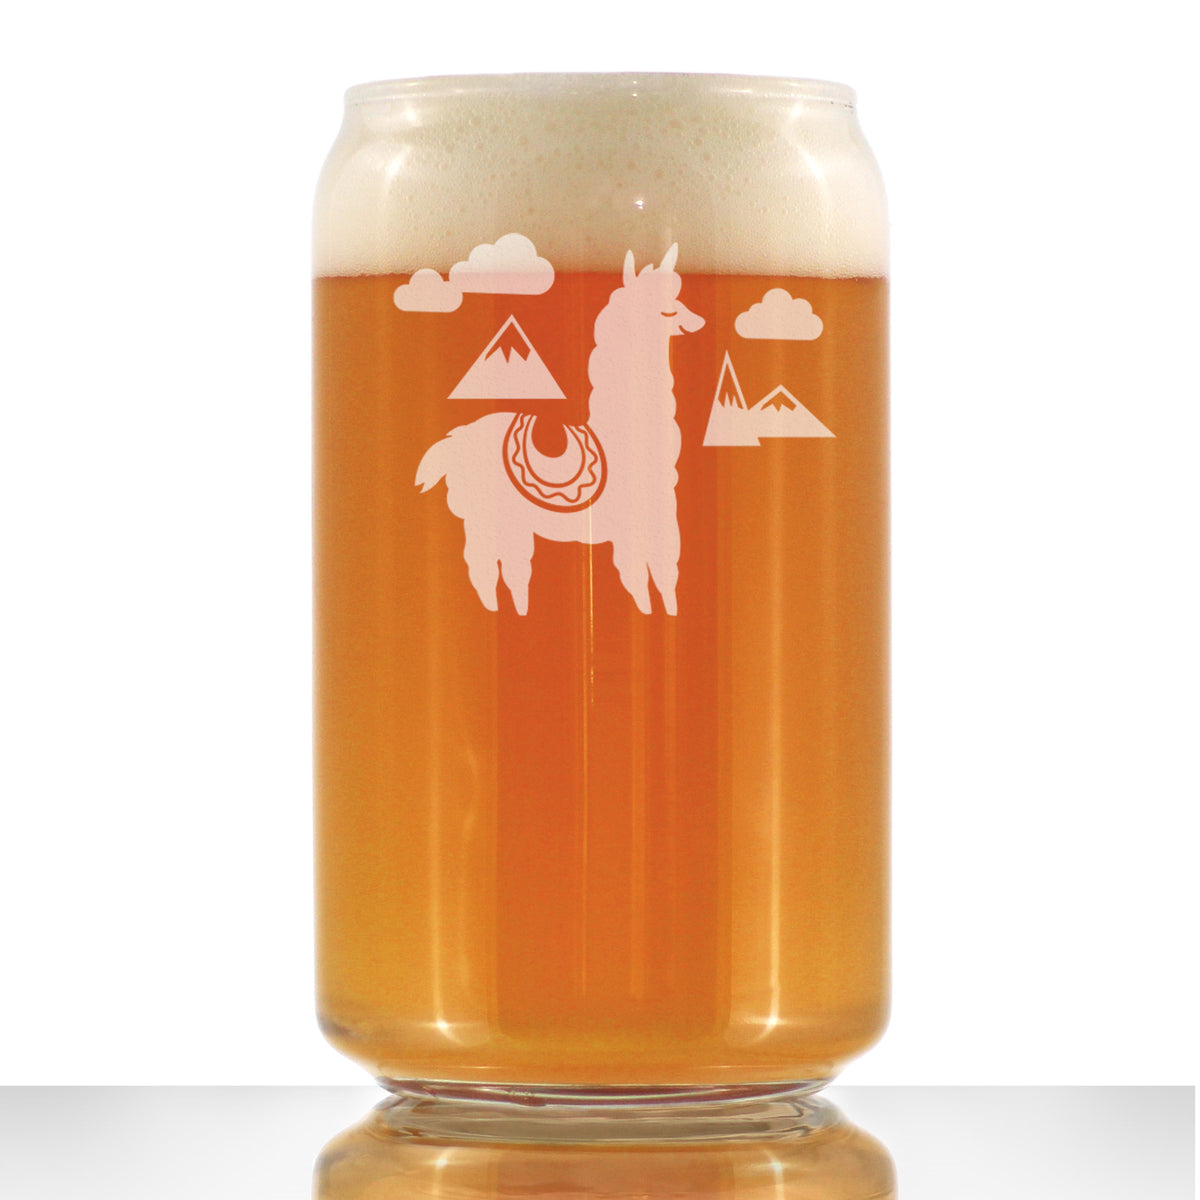 Alpaca Beer Can Pint Glass - Unique Funny Farm Animal Themed Decor and Gifts for Alpaca Lovers - 16 oz